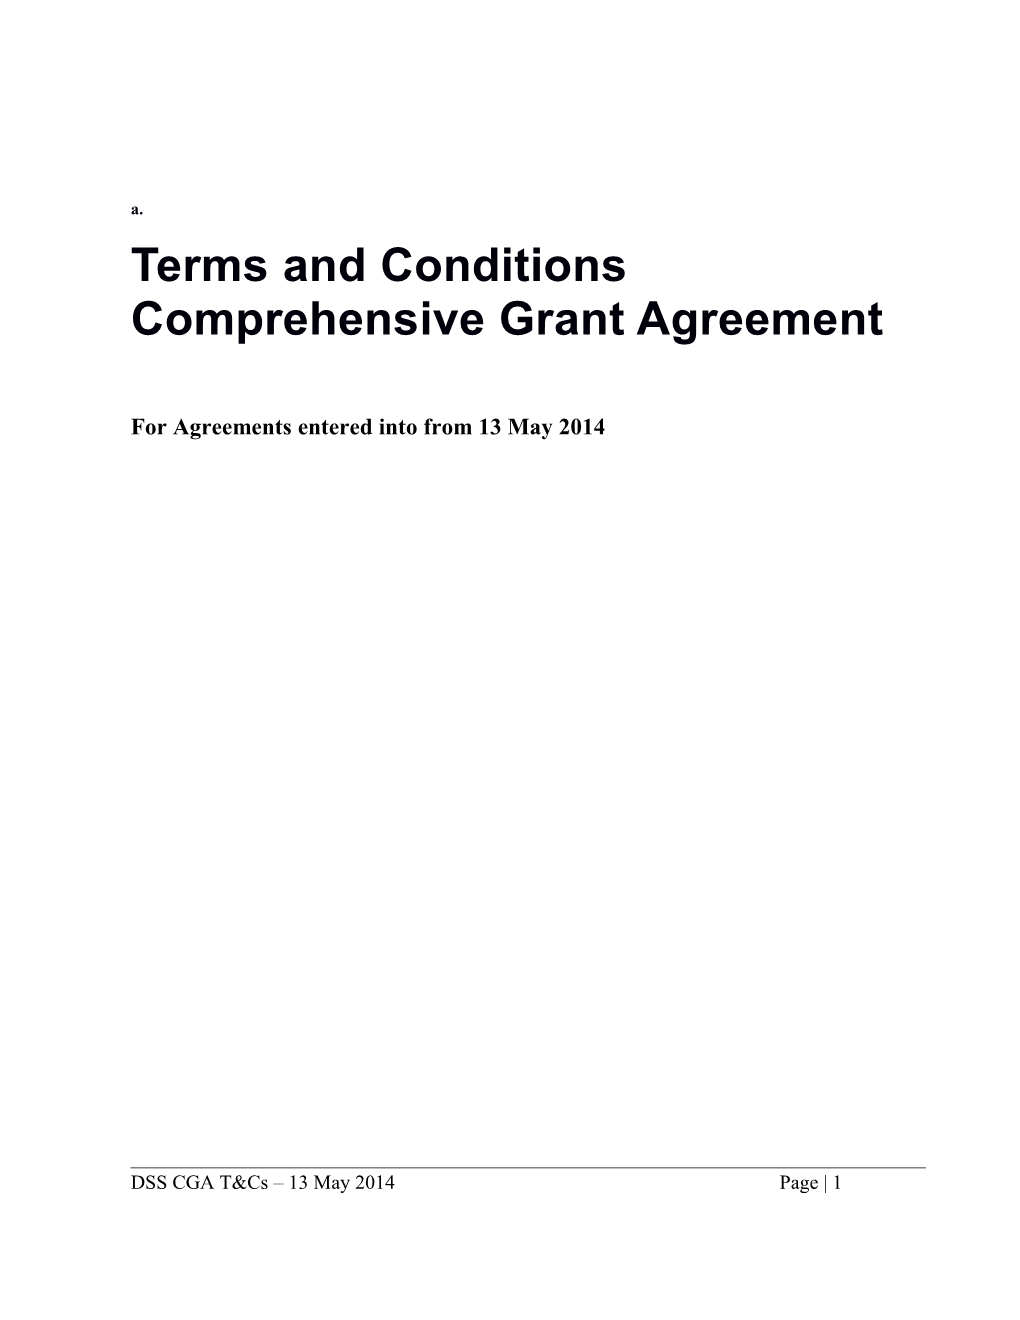 Terms and Conditions Comprehensive Grant Agreement